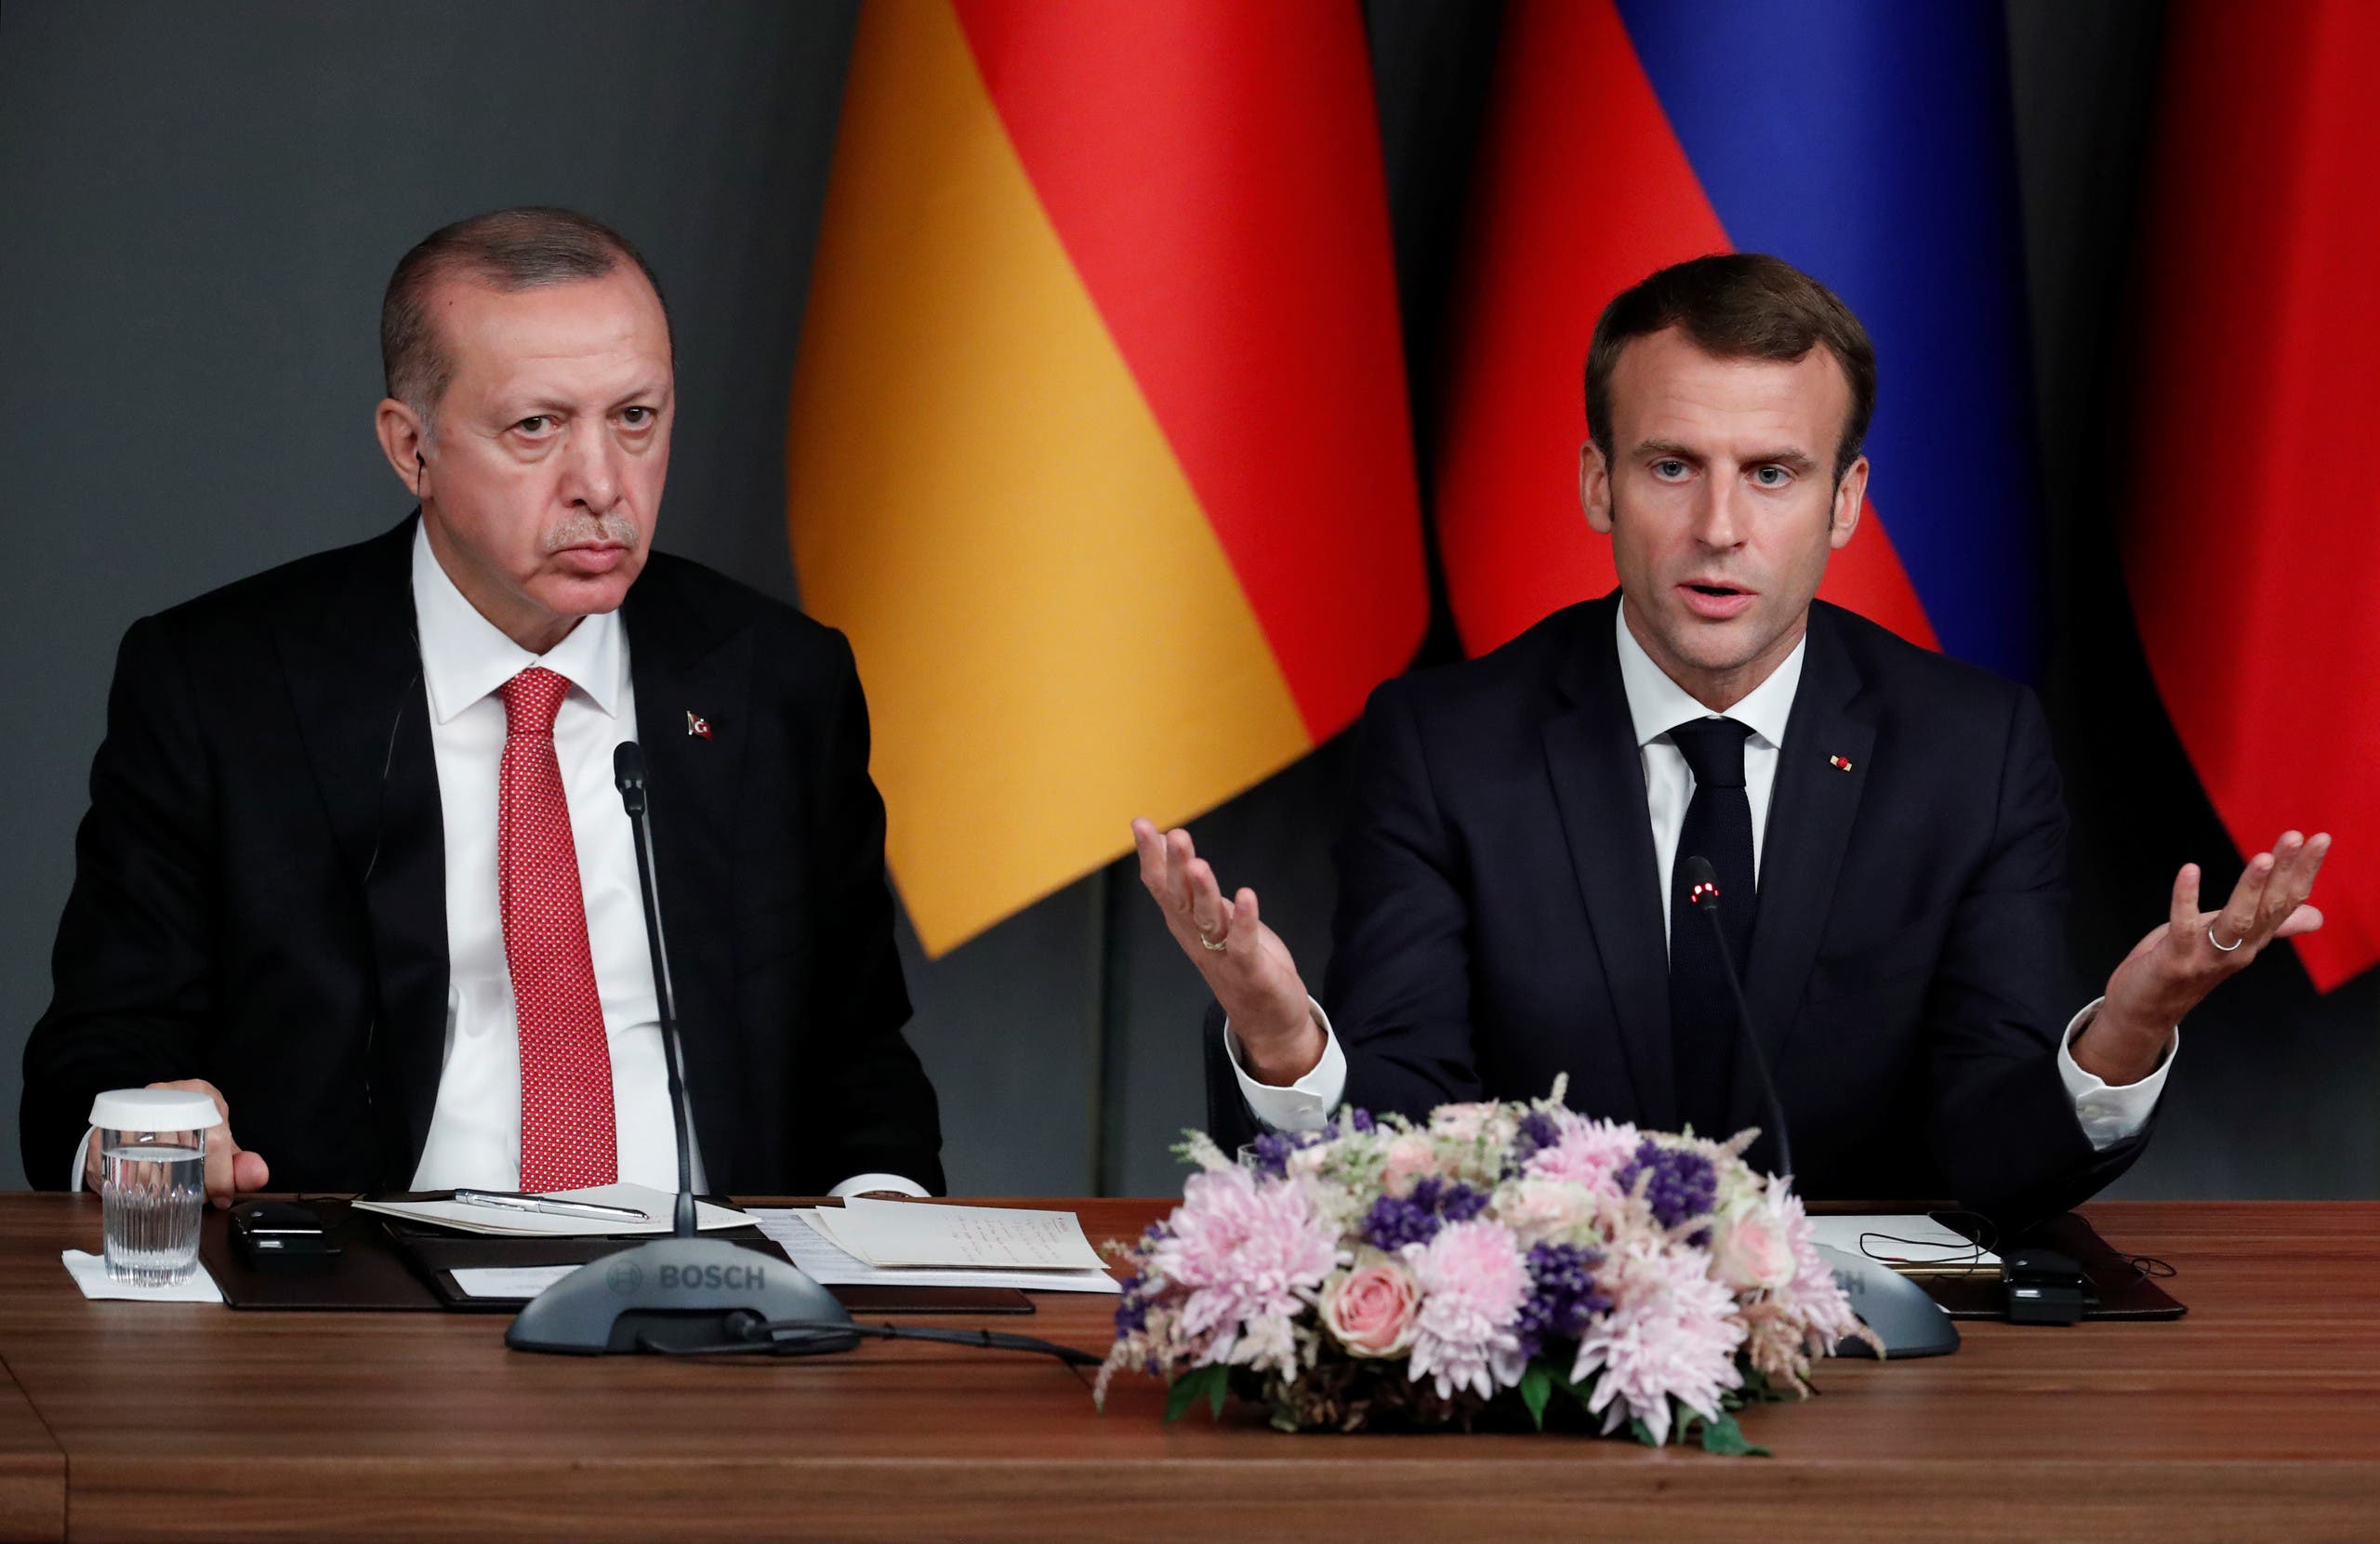 Turkish President Tayyip Erdogan and French President Emmanuel Macron attend a news conference during the Syria summit in Istanbul, Turkey, October 27, 2018. (Reuters)